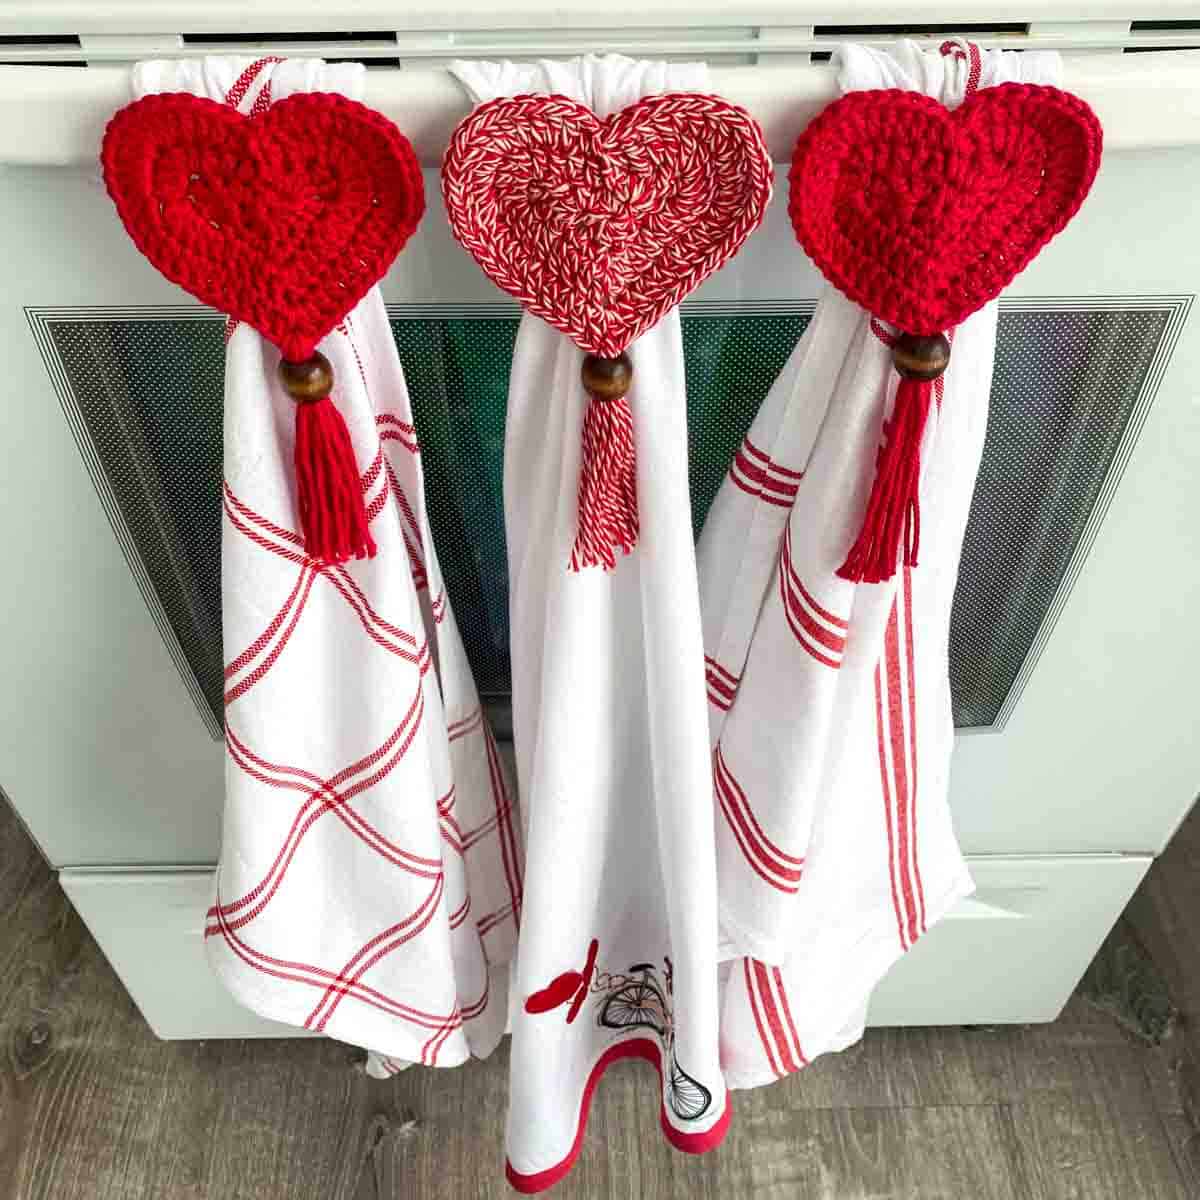 3 Valentine dish towels with crochet heart toppers hanging on a oven